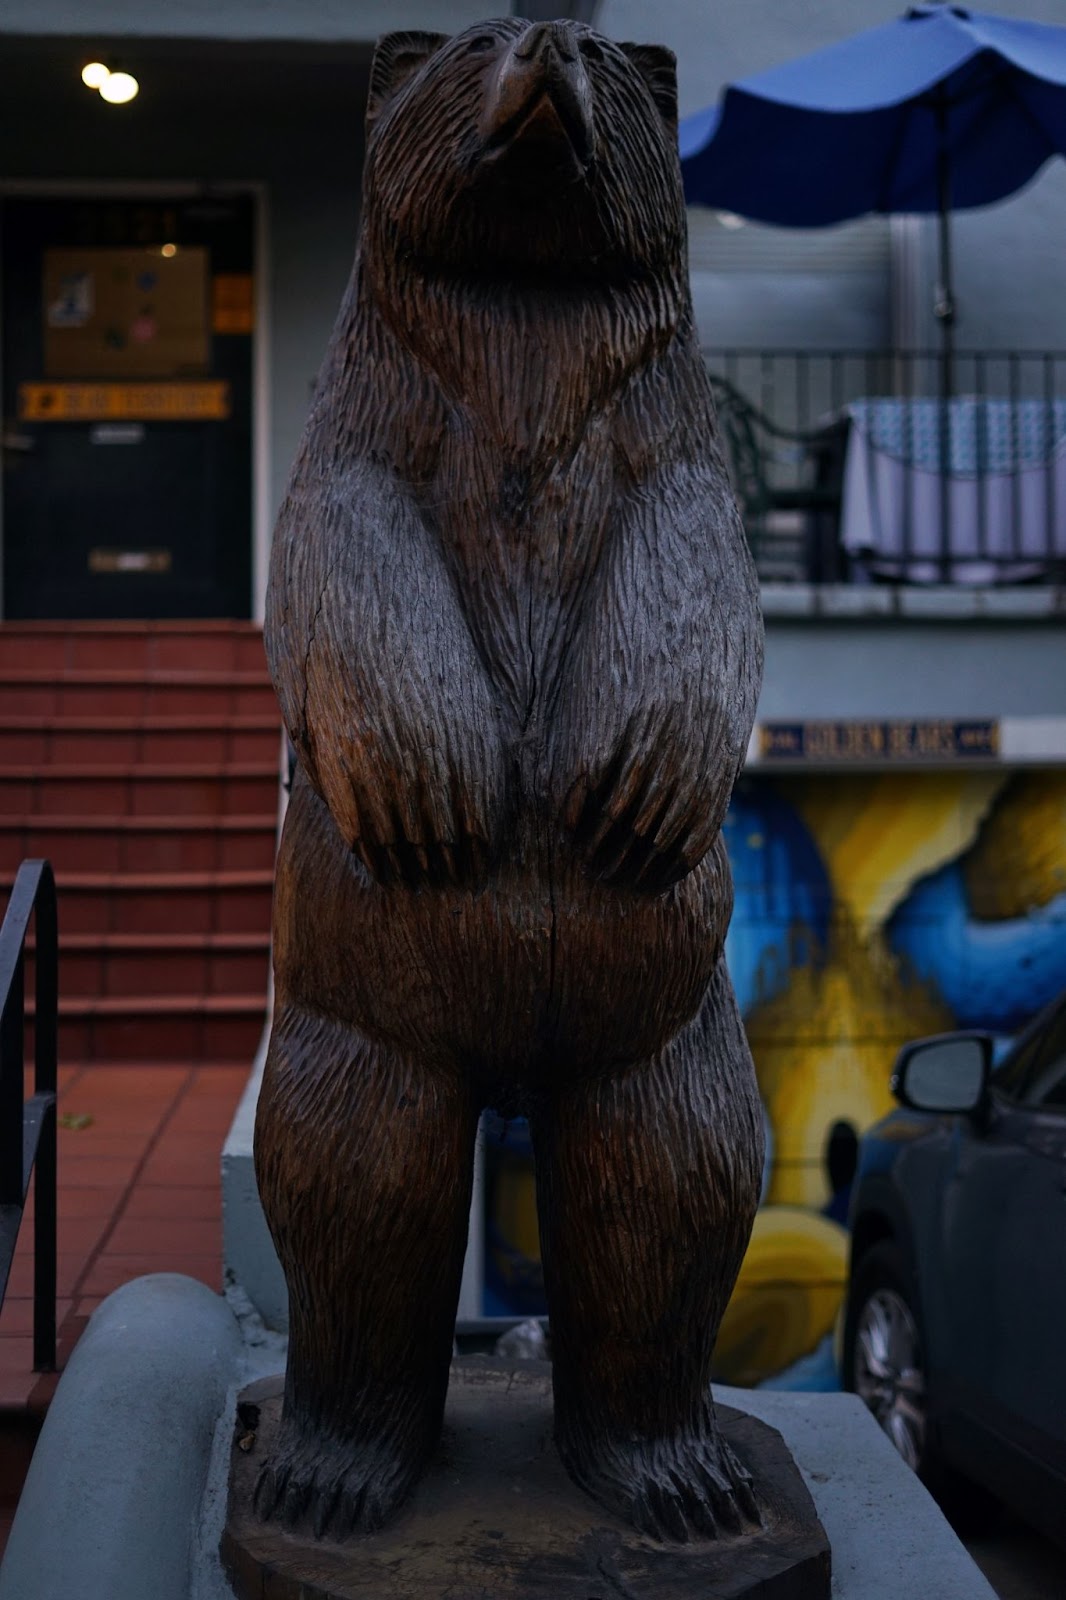 A wood carved statue of a bear standing upright. 